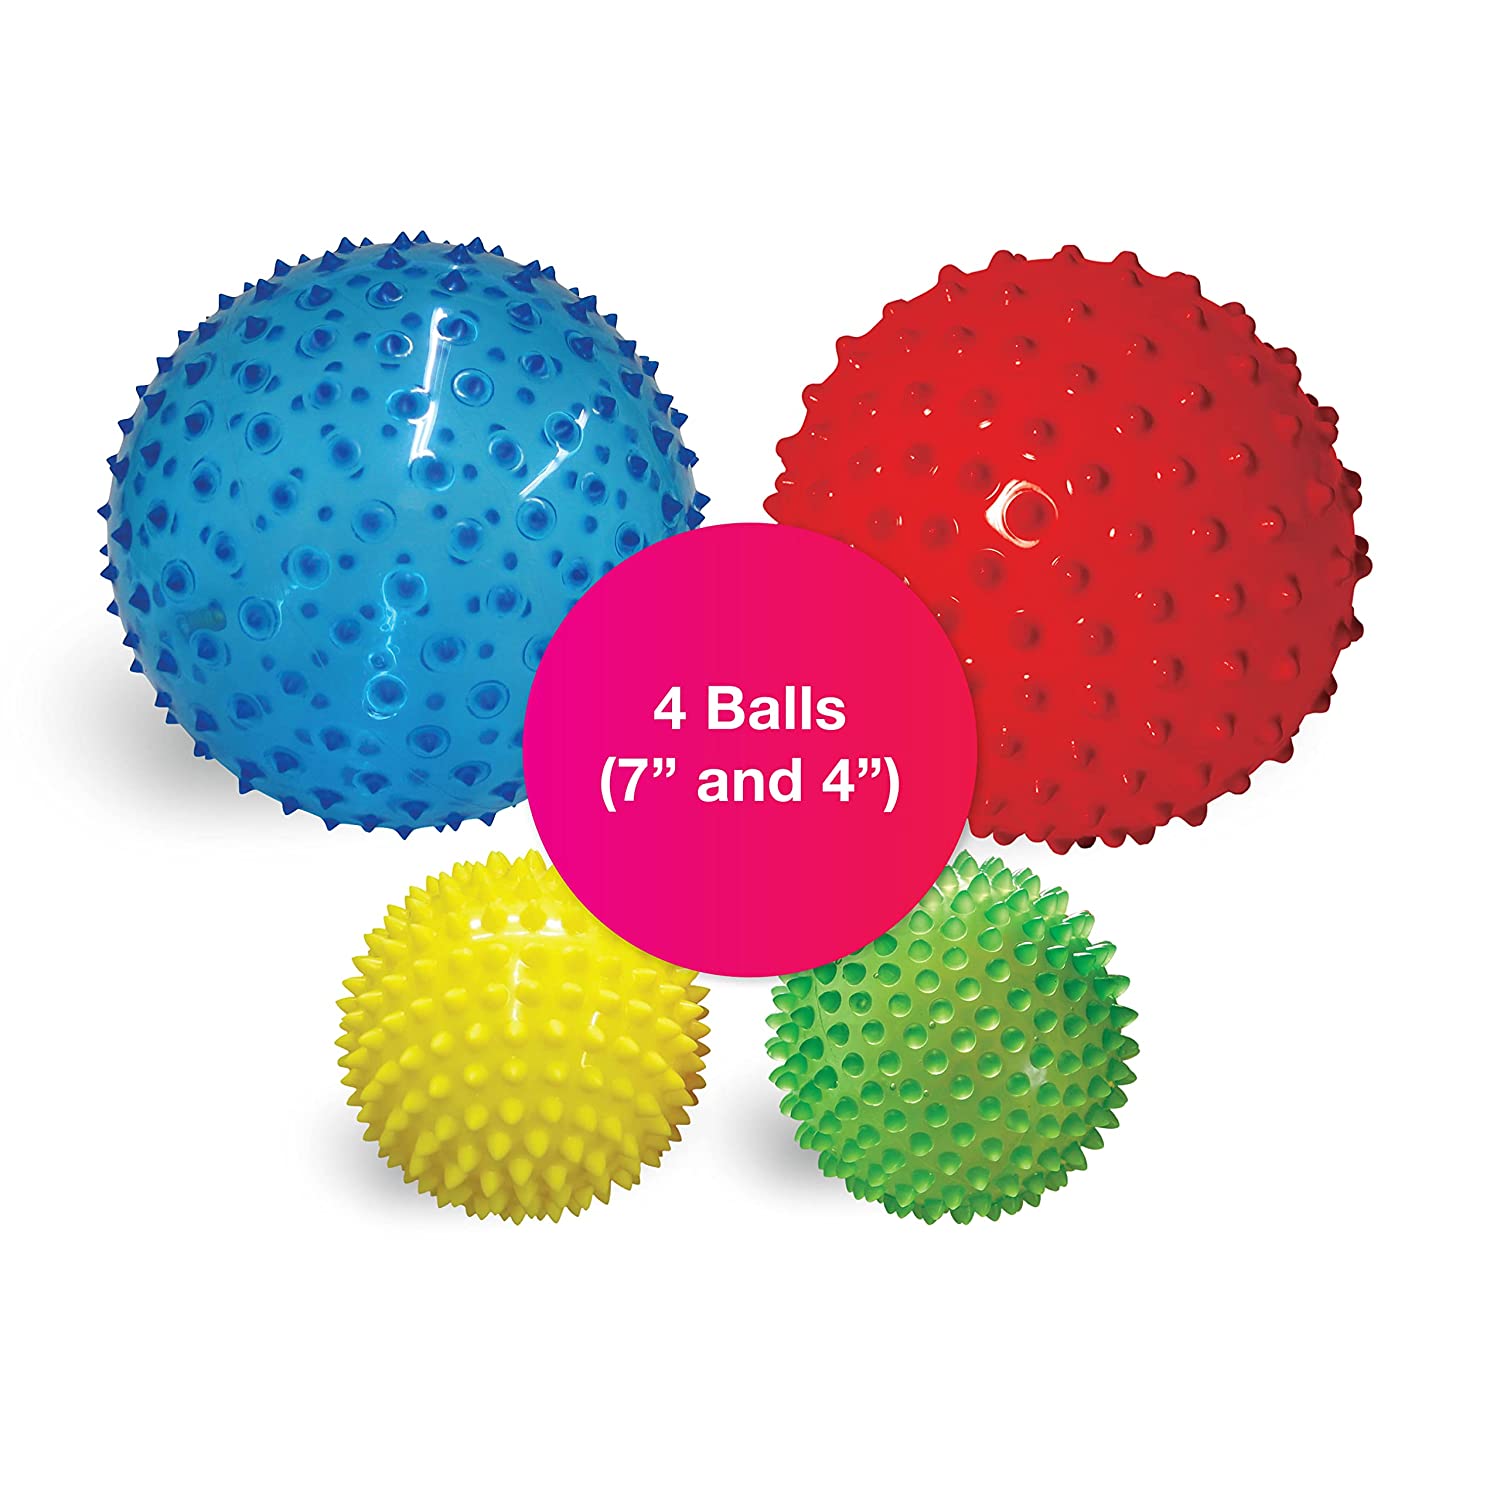 Edushape Sensory Balls for Baby, Mega Pack - Assorted Baby Balls That Help Enhance Gross Motor Skills for Kids Aged 6 Months and Up - Set of 4 Vibrant Colorful and Unique Textured Balls for Baby